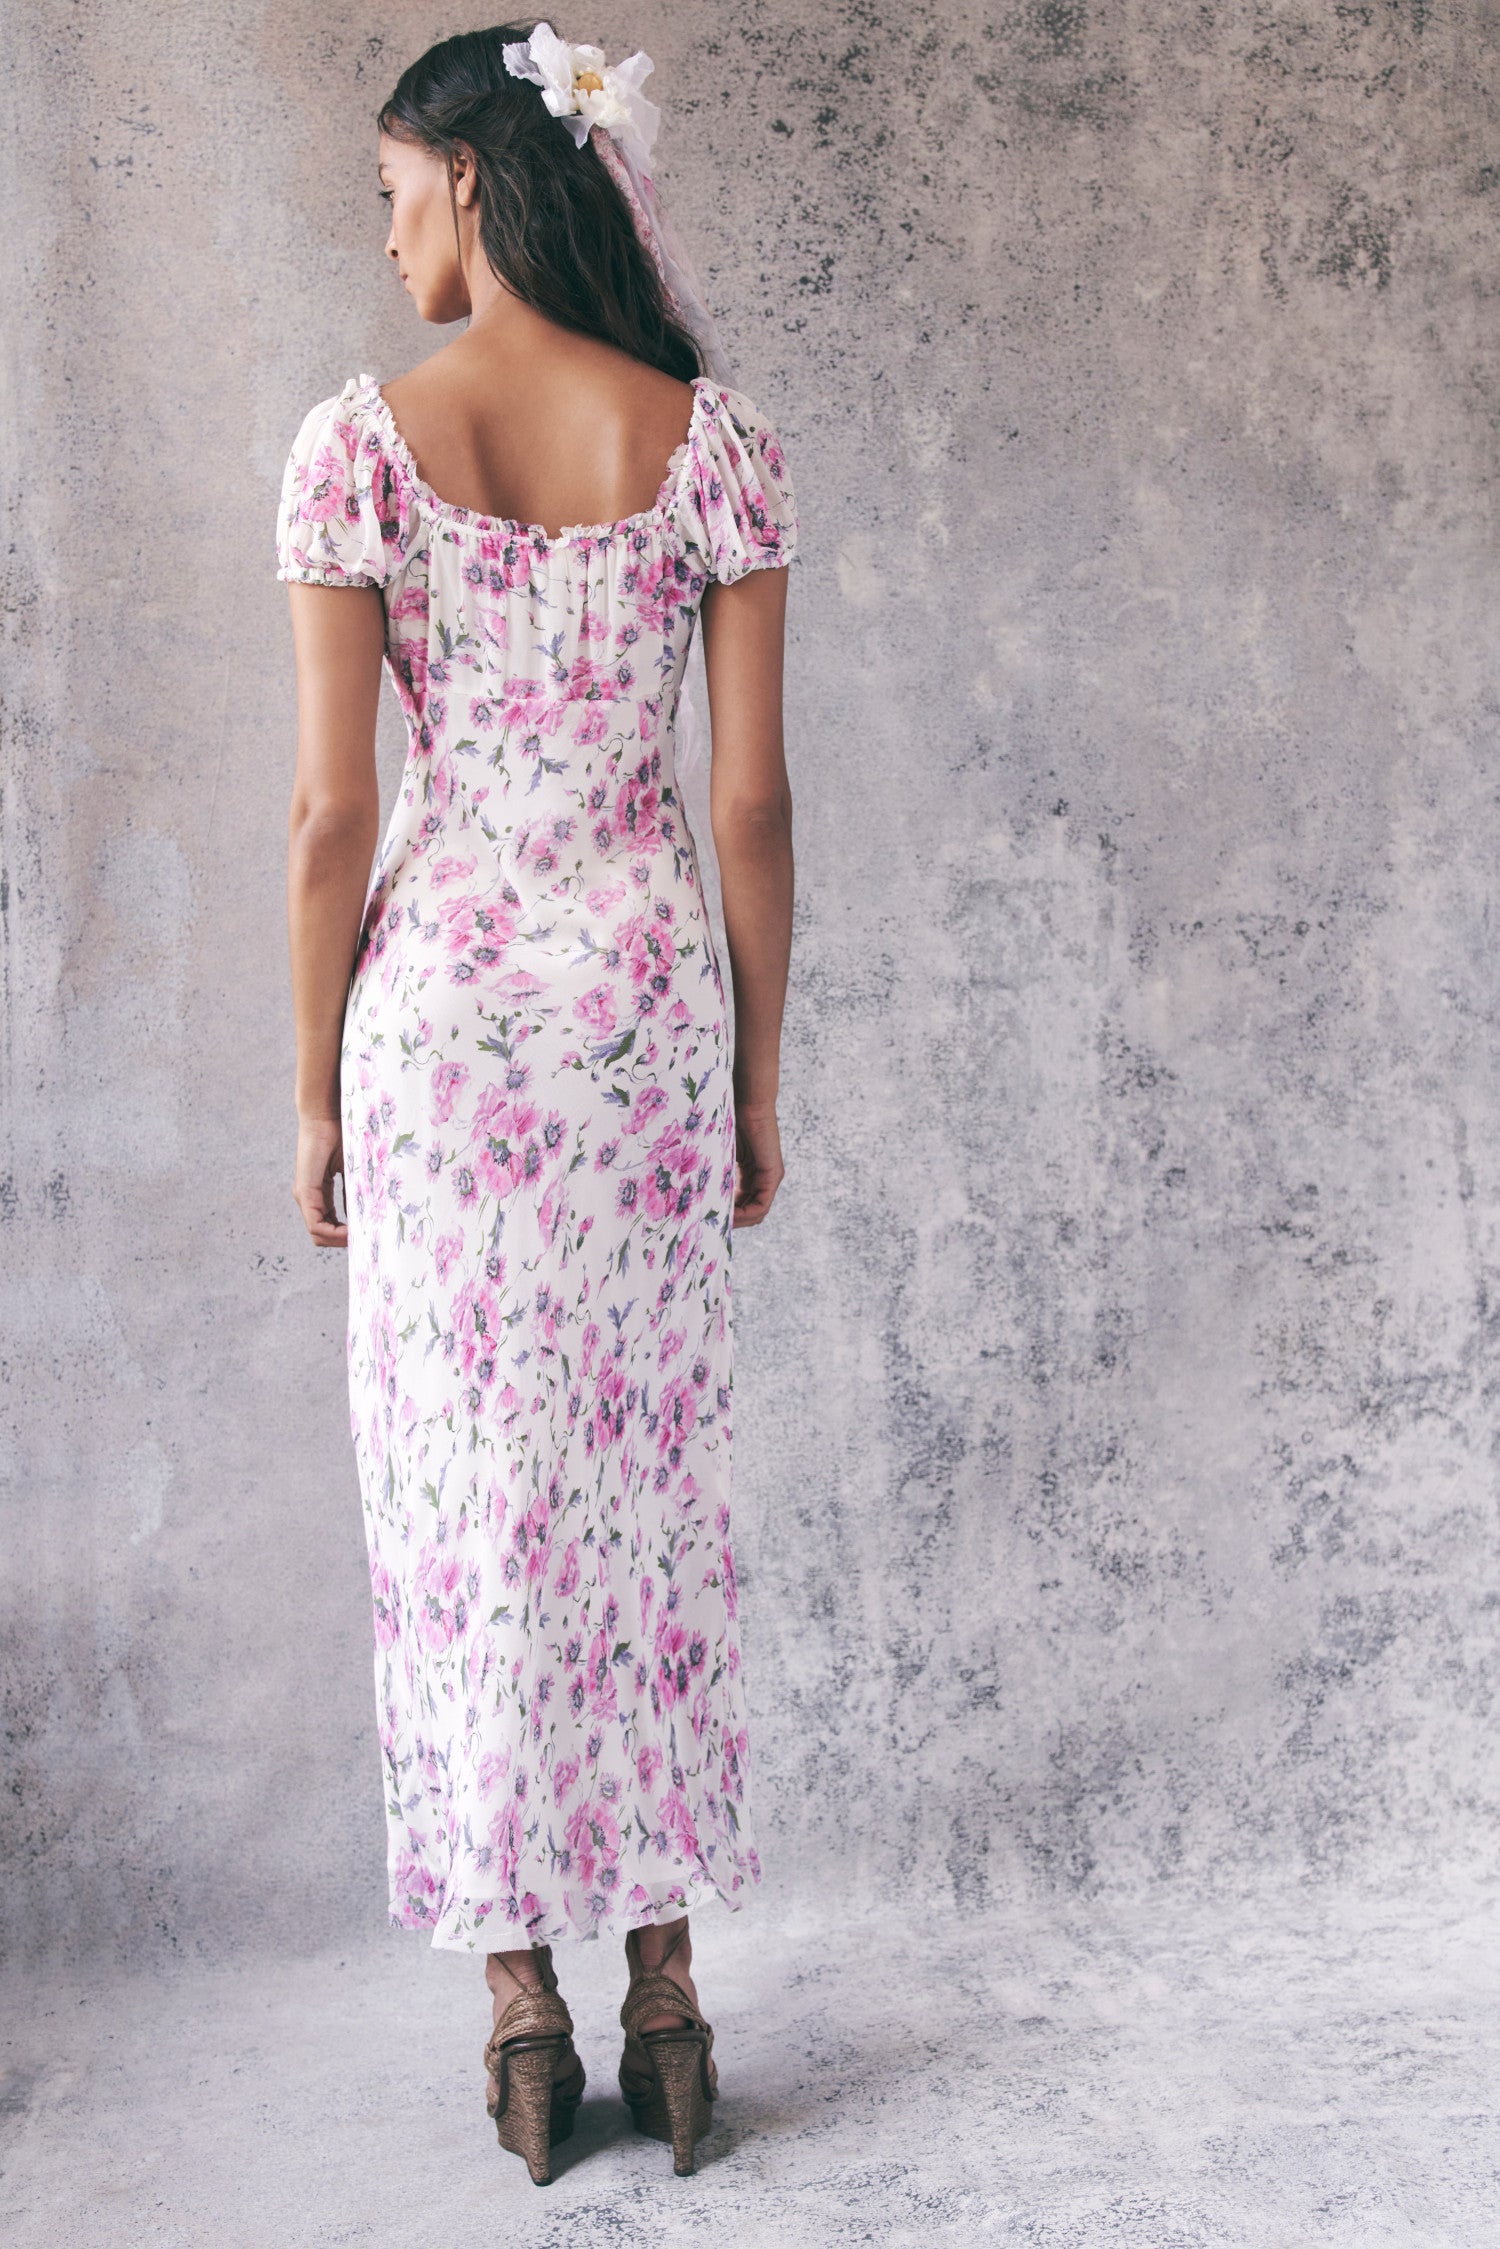 Back image of model wearing pink and white floral short sleeve maxi dress